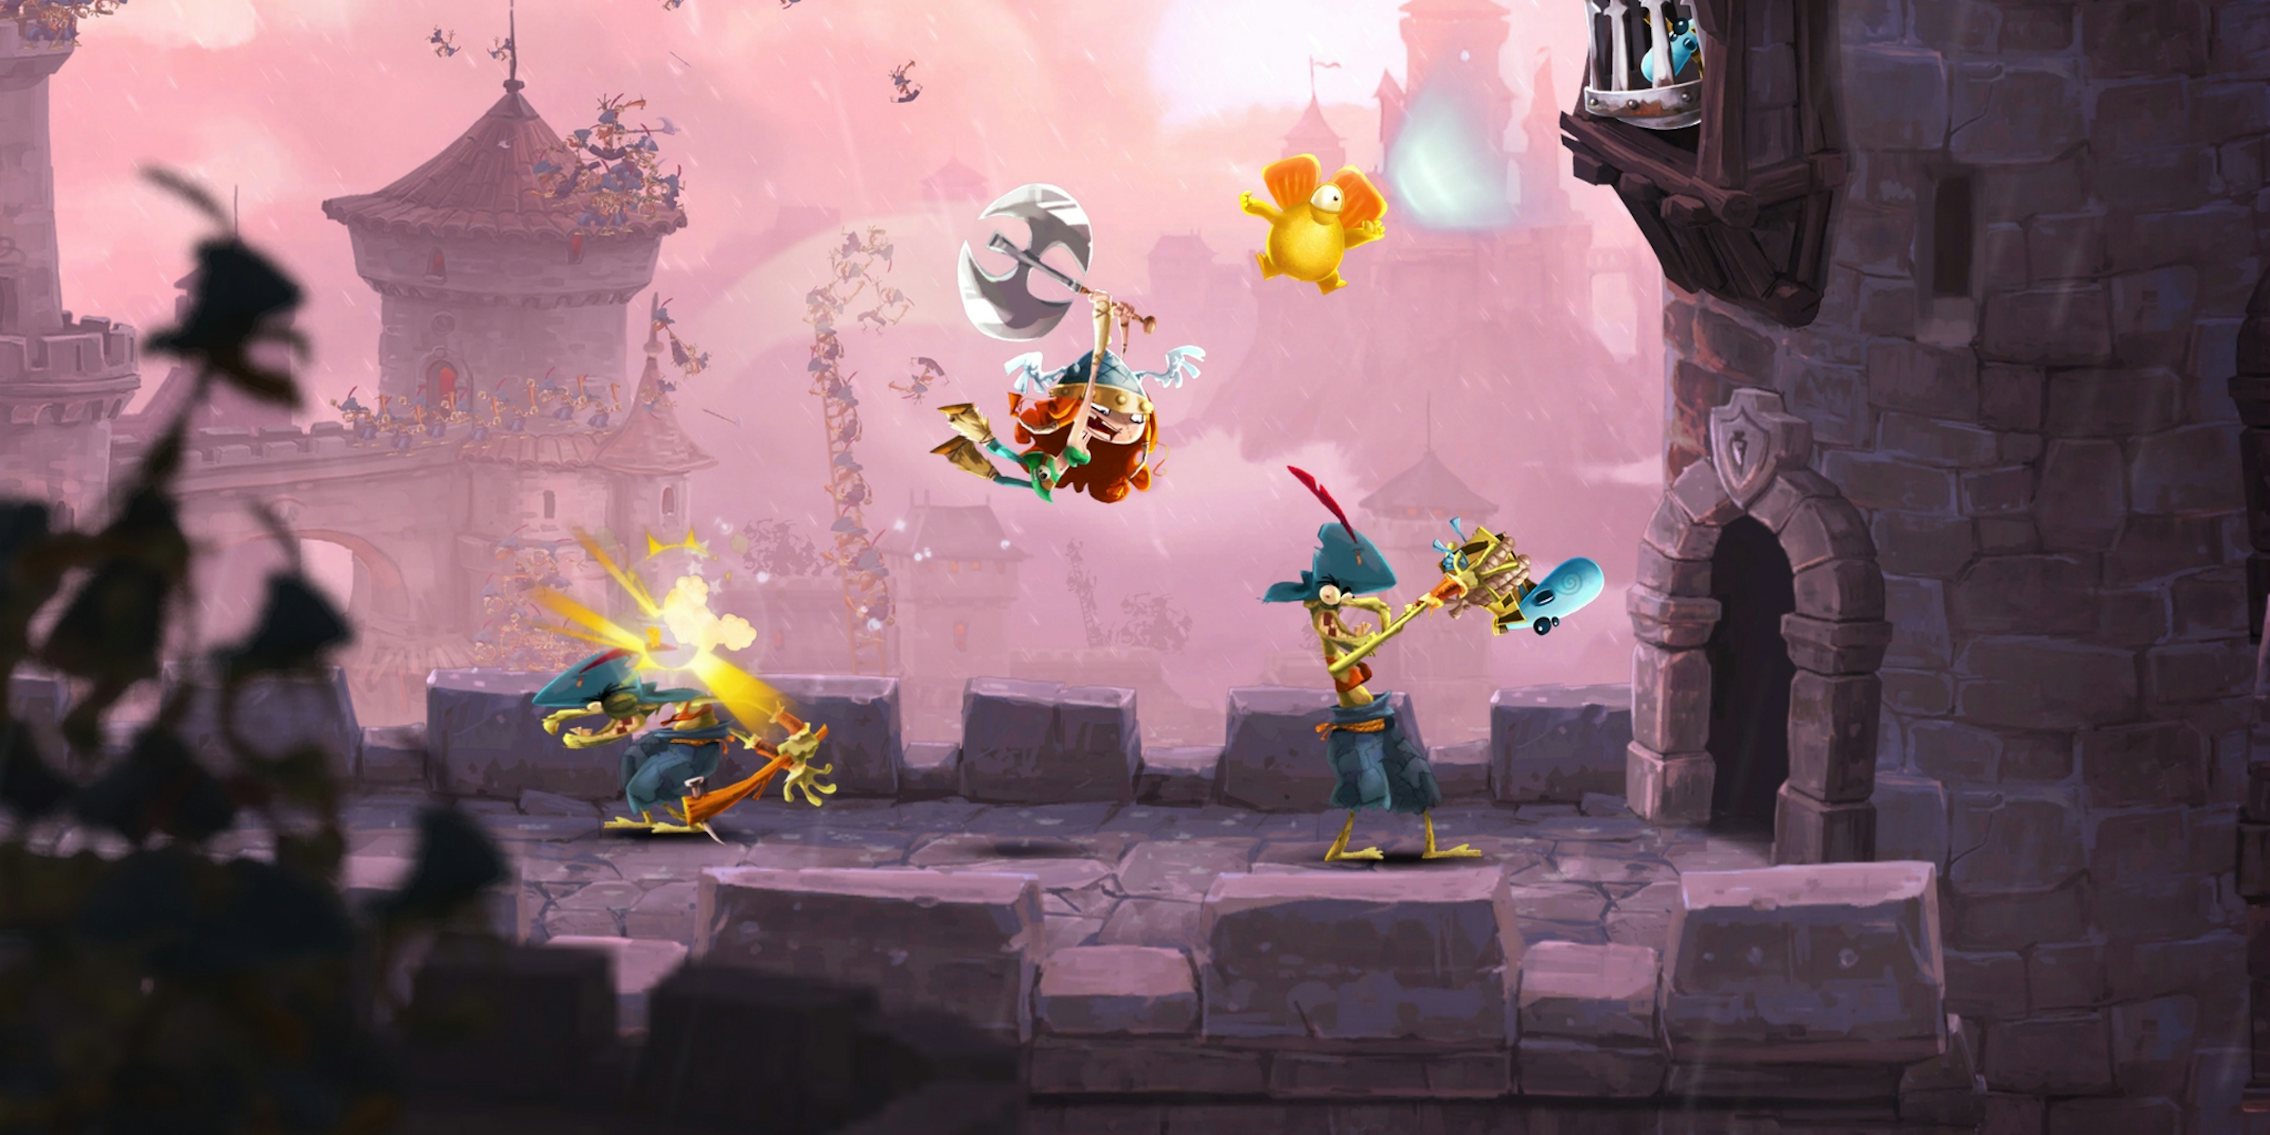 Rayman Adventures (By Ubisoft) iOS / Android Gameplay Video - Part